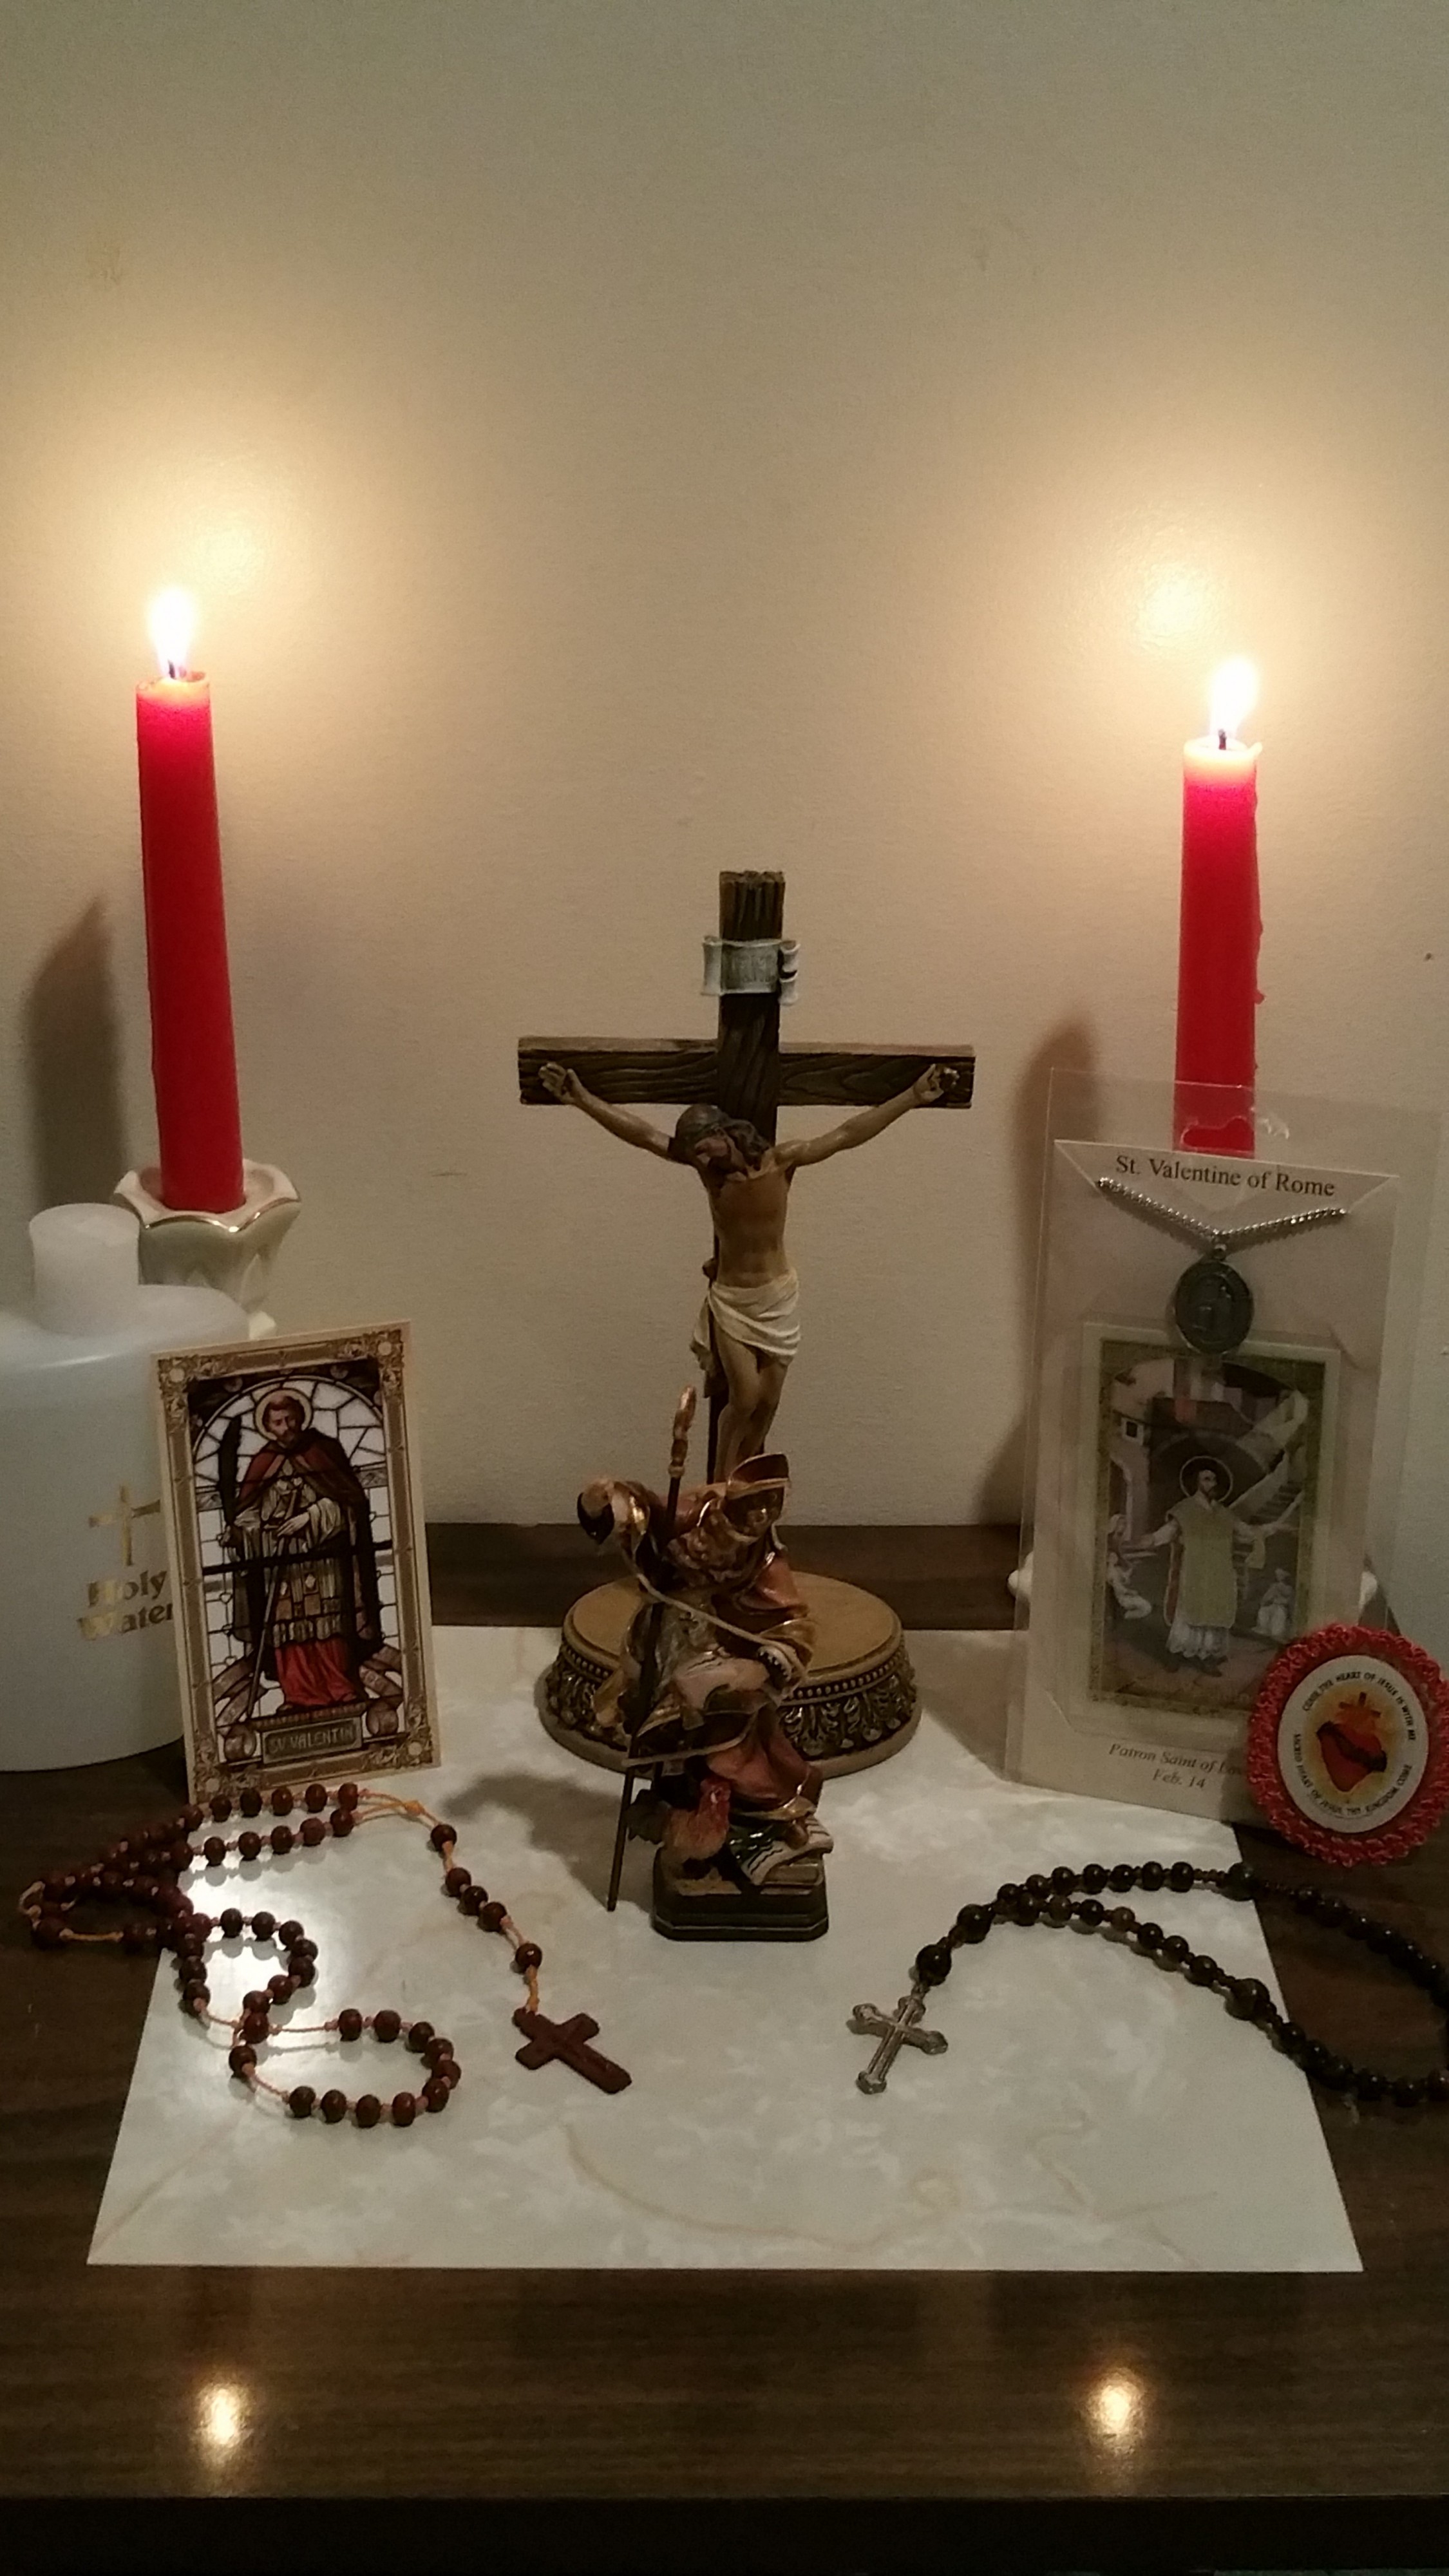 Saint Valentine statue, devotional medal, and holy cards